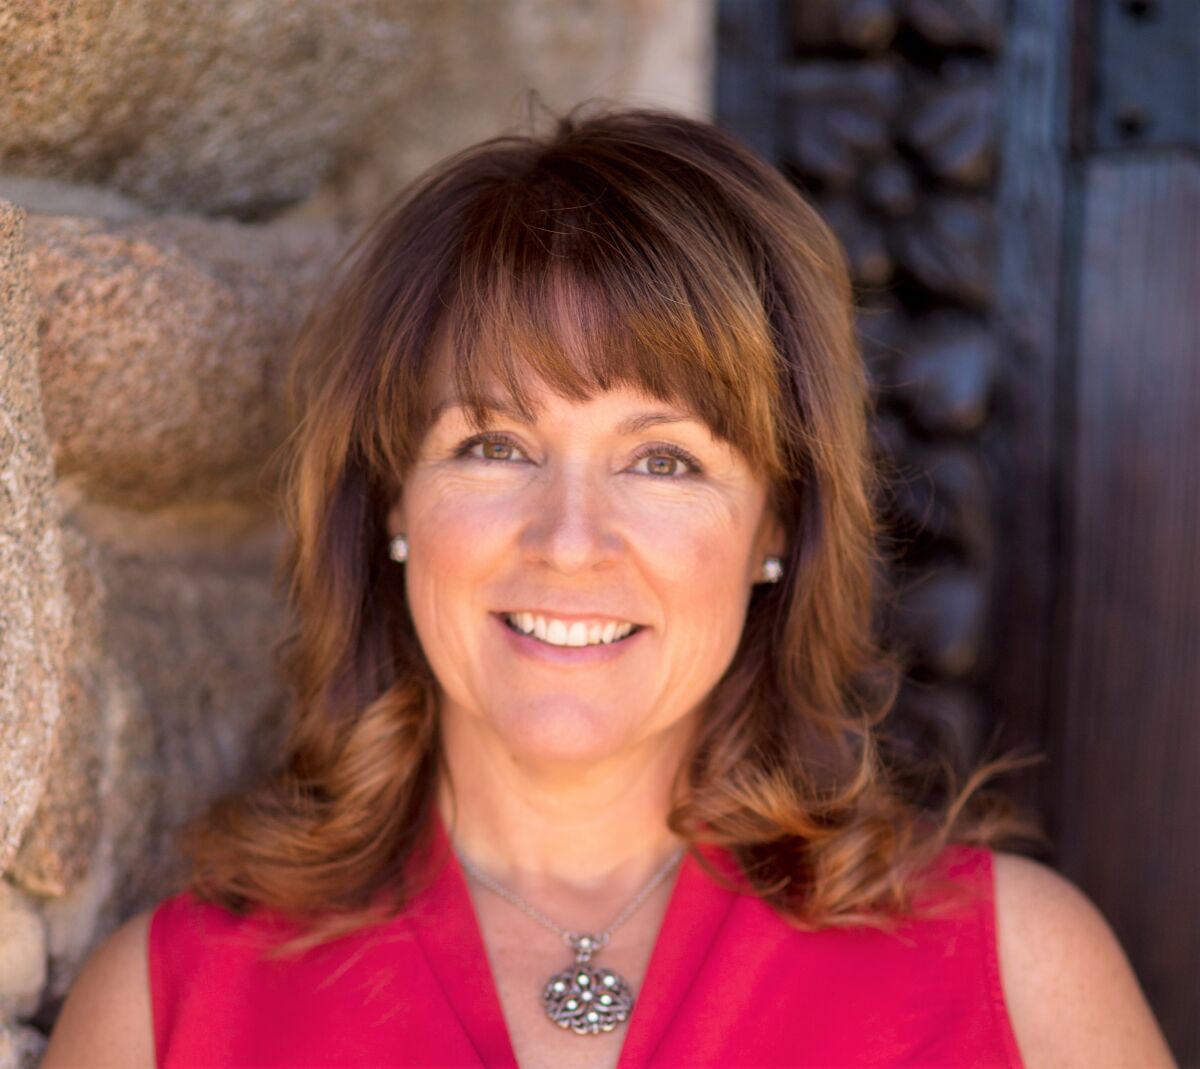 Karen Domnitz is vice president of the Ramona Real Estate Association and a Realtor with Century 21